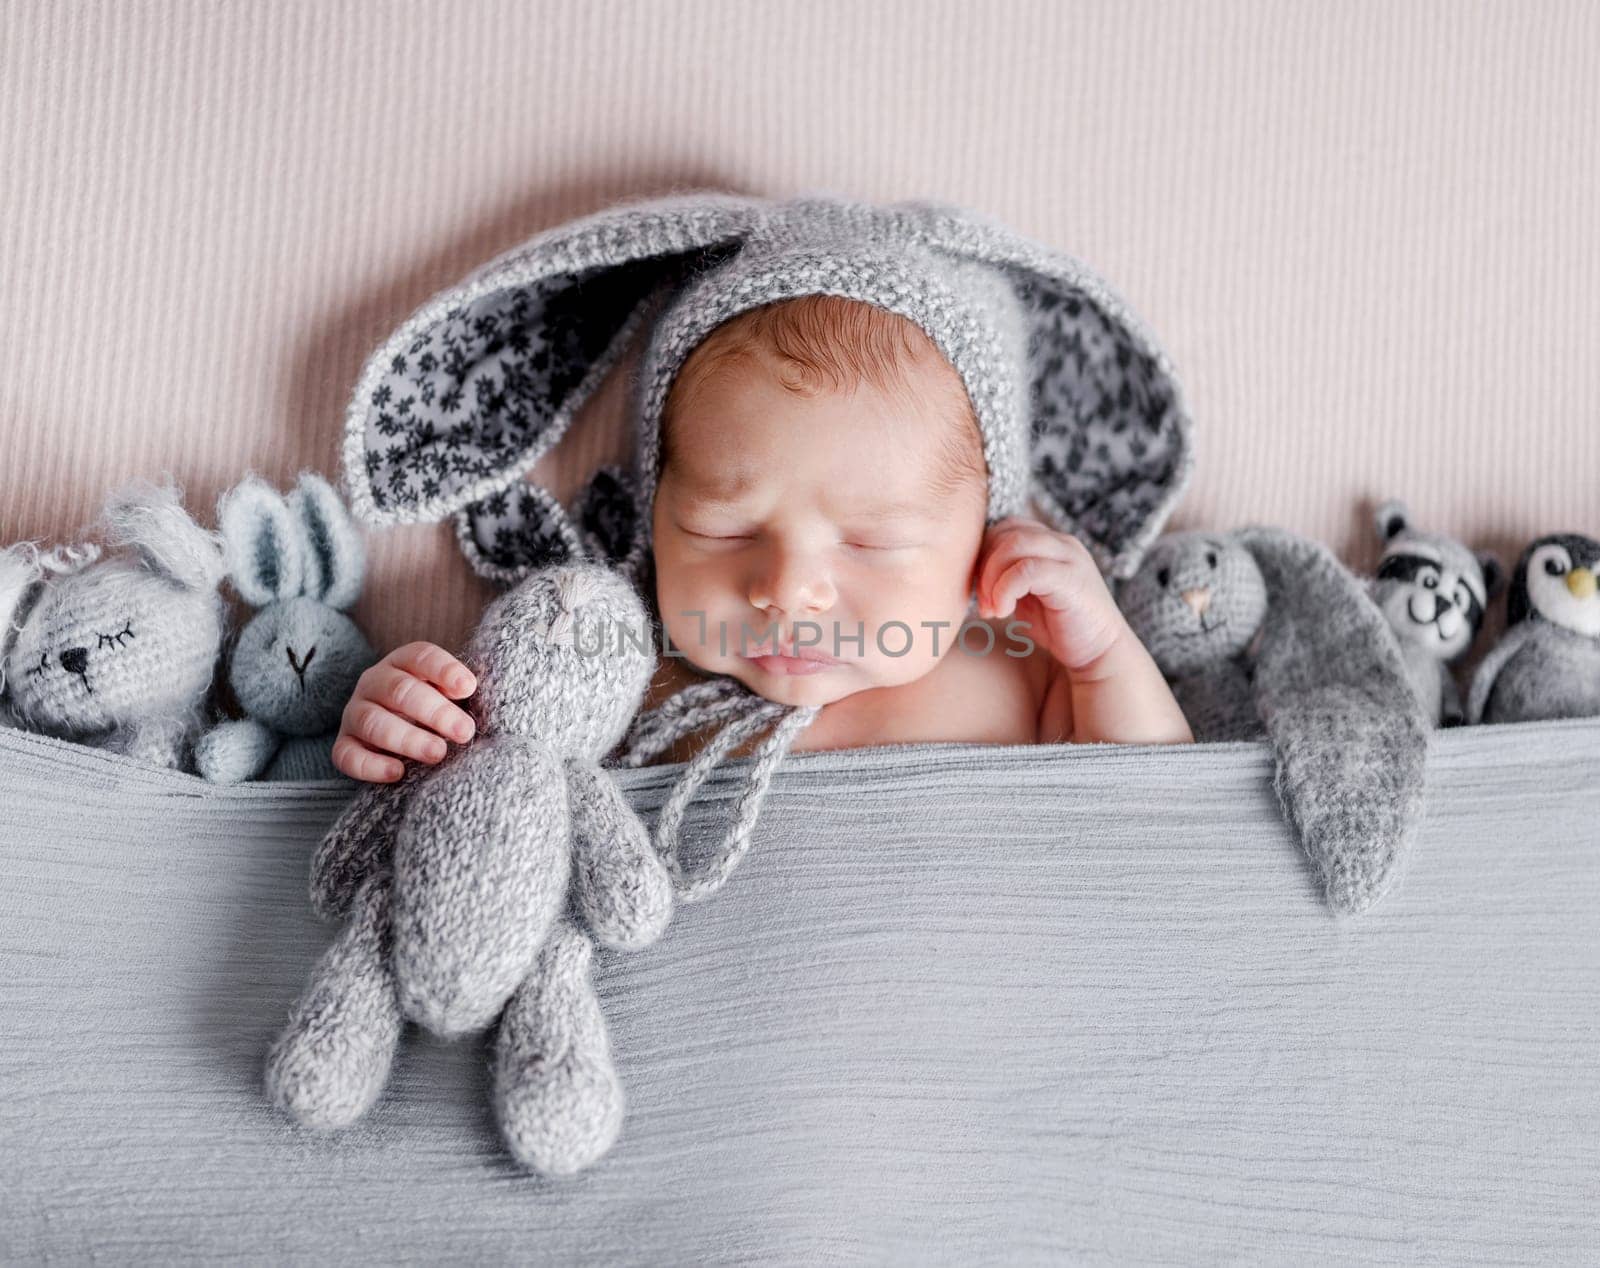 Cute newborn baby boy sleeping wearing bunny ears hat and holding knitted handmade toys. Adorable infant child kid napping studio portrait